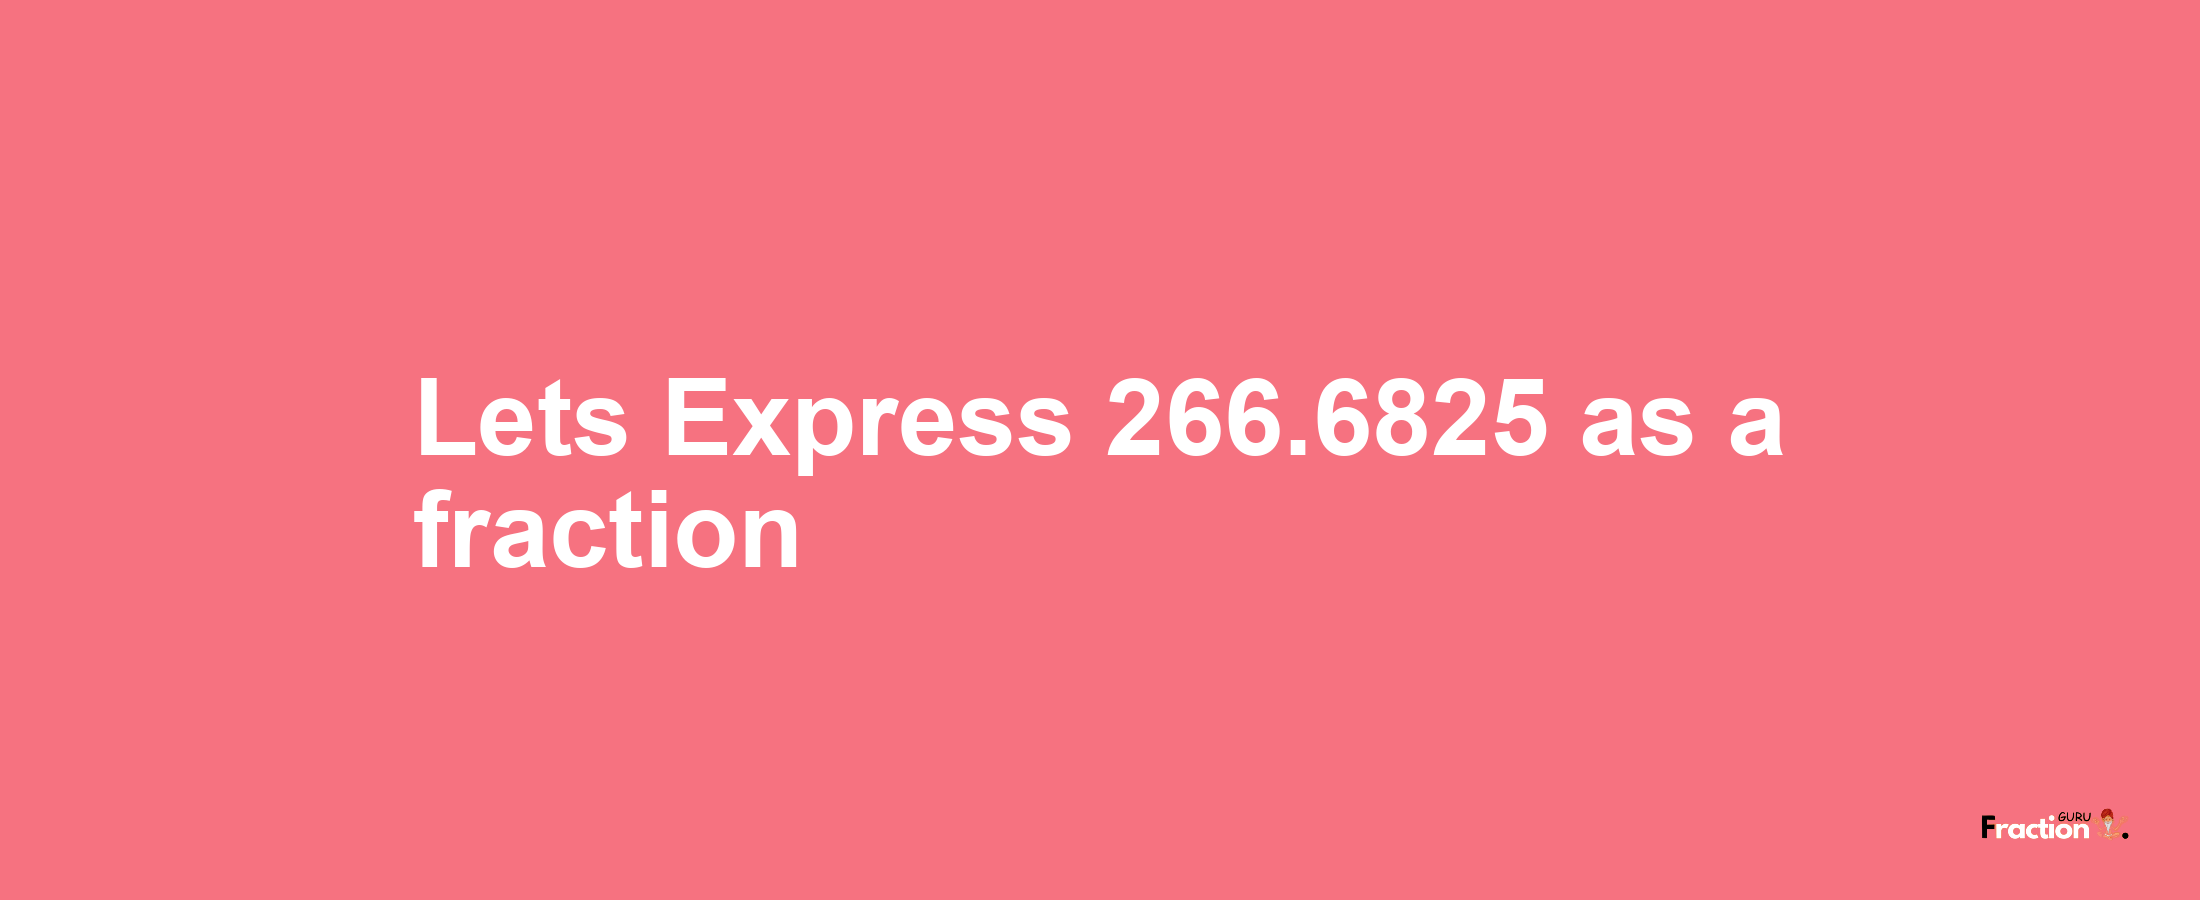 Lets Express 266.6825 as afraction